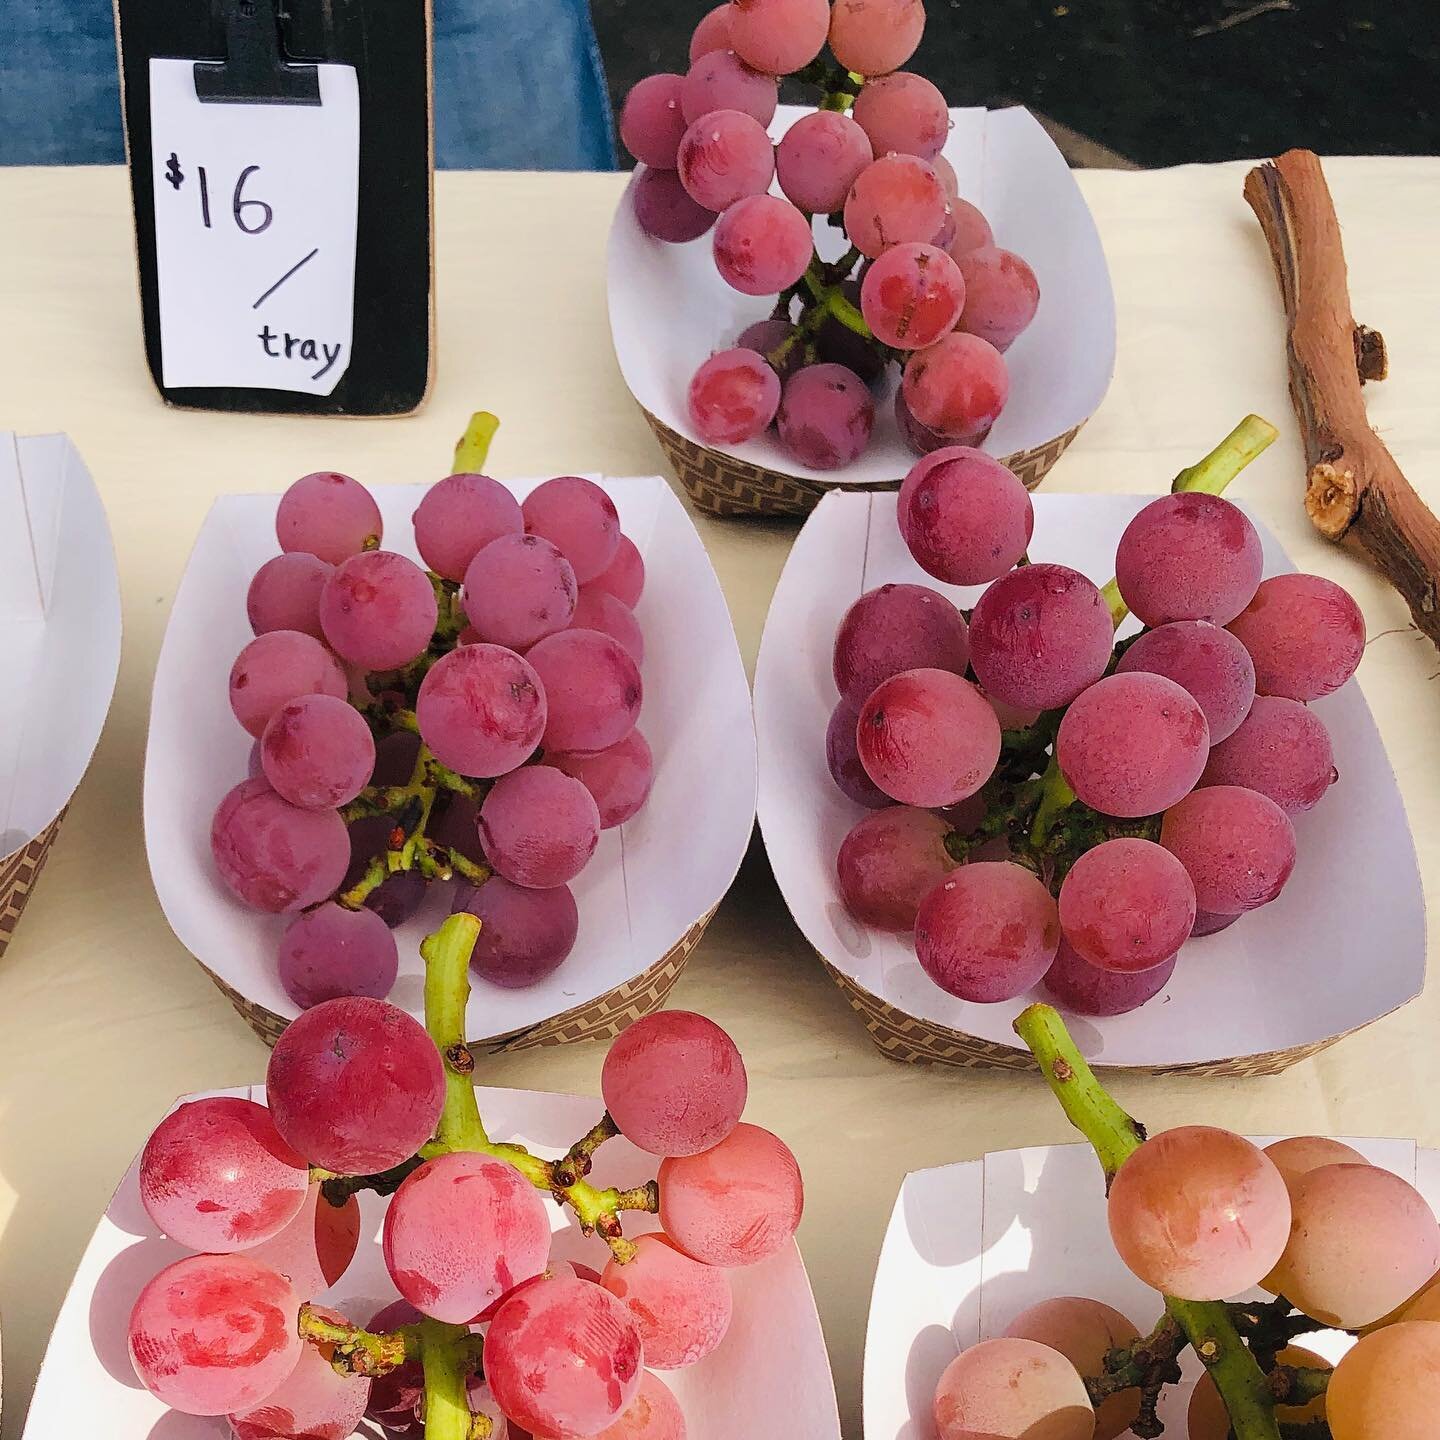 Santa Barbara Farmers Market&hellip; and these were the only mid-grade variety at a paltry $16 a tray: $1 a grape! No joke. 😆. #.01% #savorit